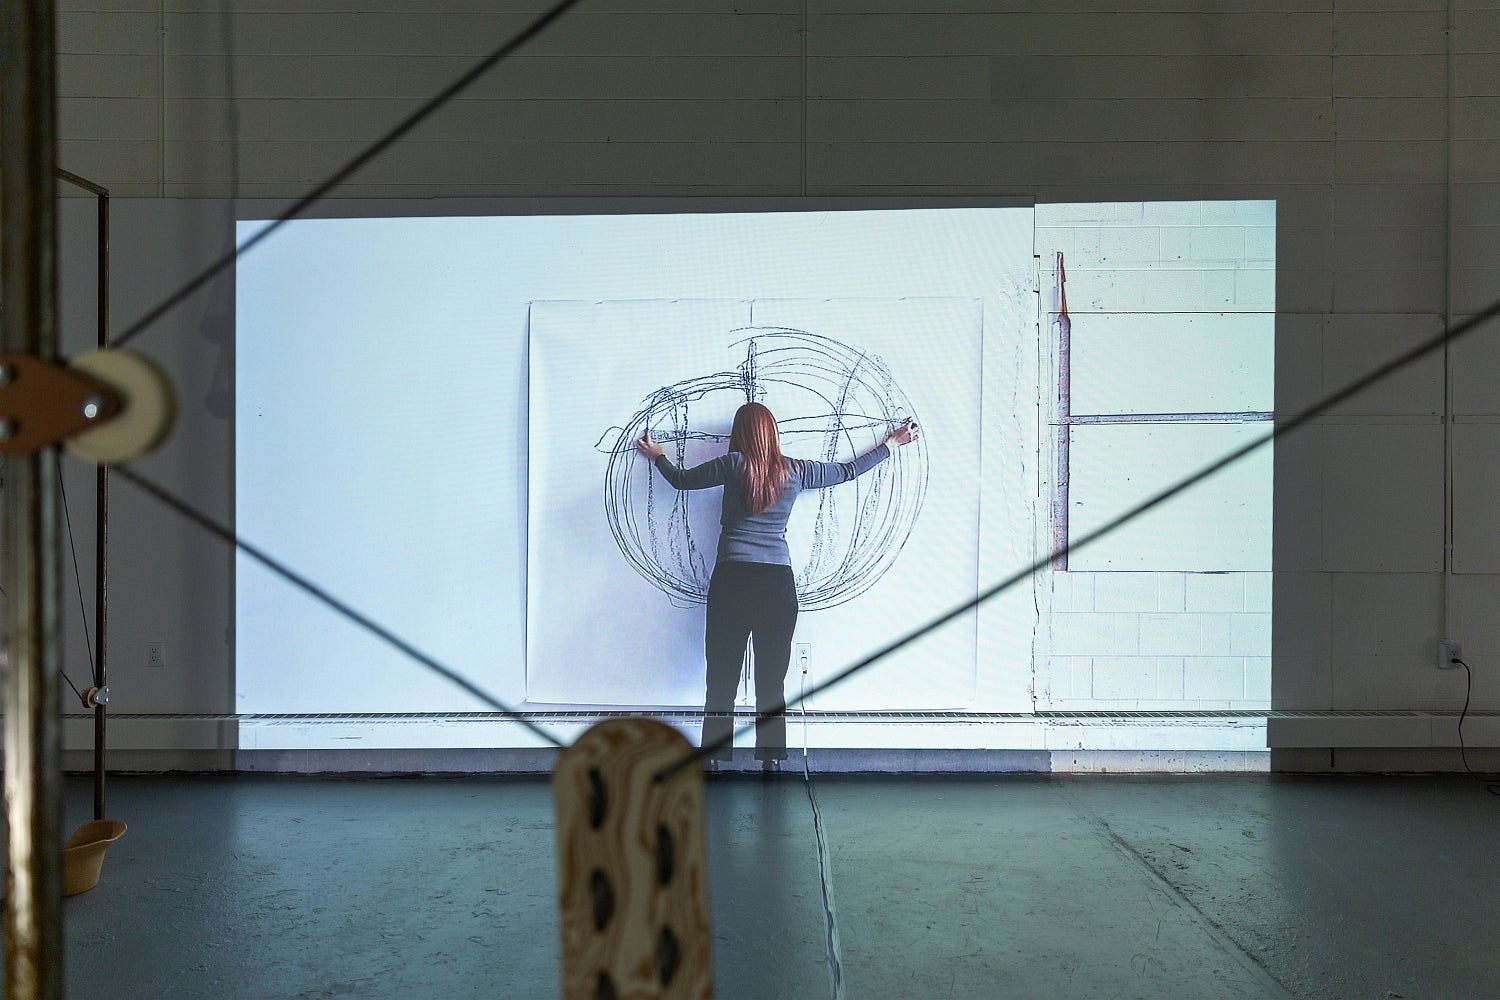 Video of a person drawing on large paper hung on a wall.  The person draws a circular shape using each arm in a sweeping motion,